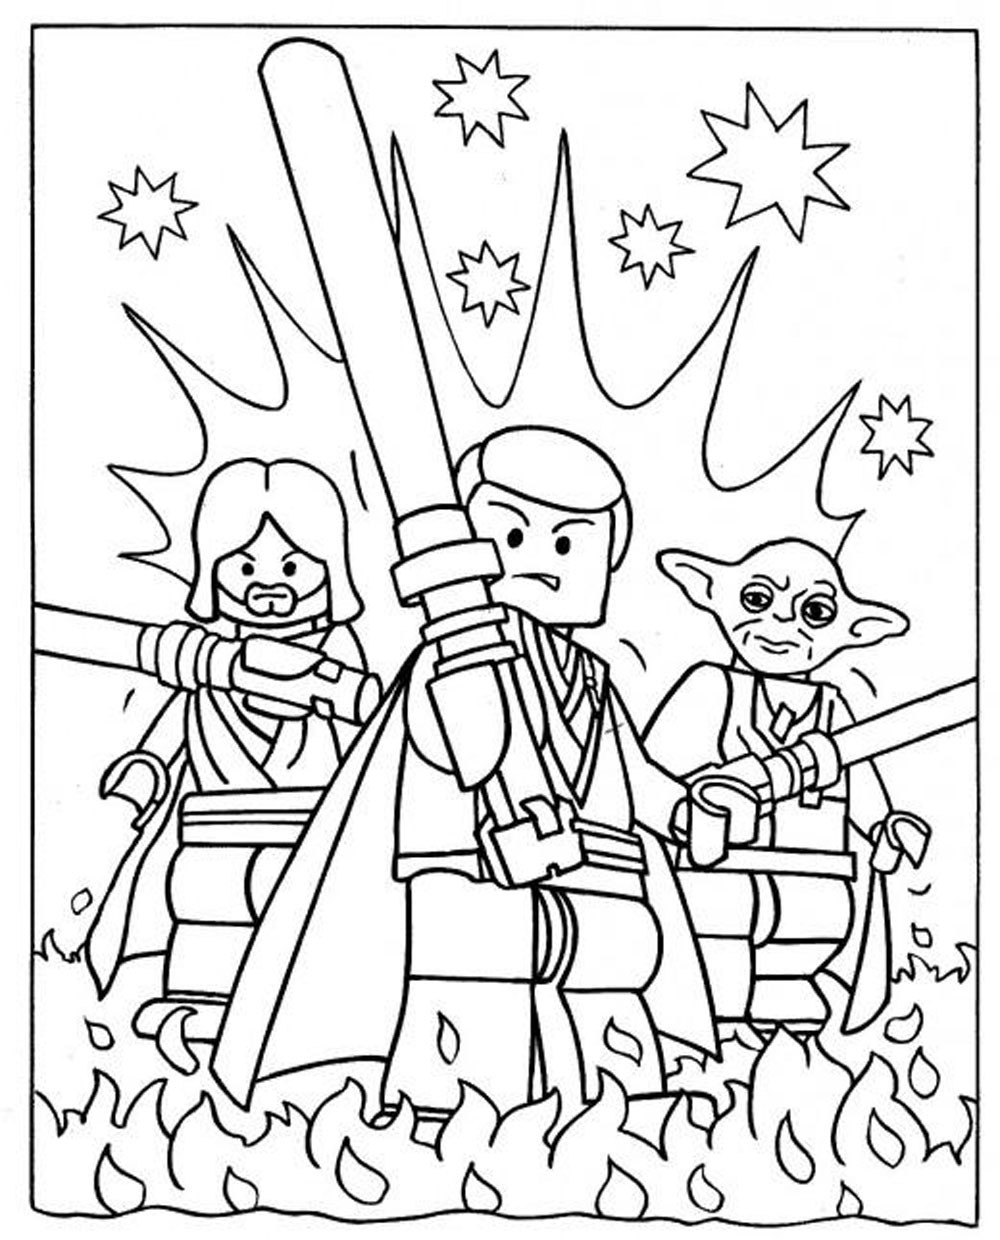 Printable Coloring Pages Star Wars
 Lego Star Wars Coloring Pages Bestofcoloring